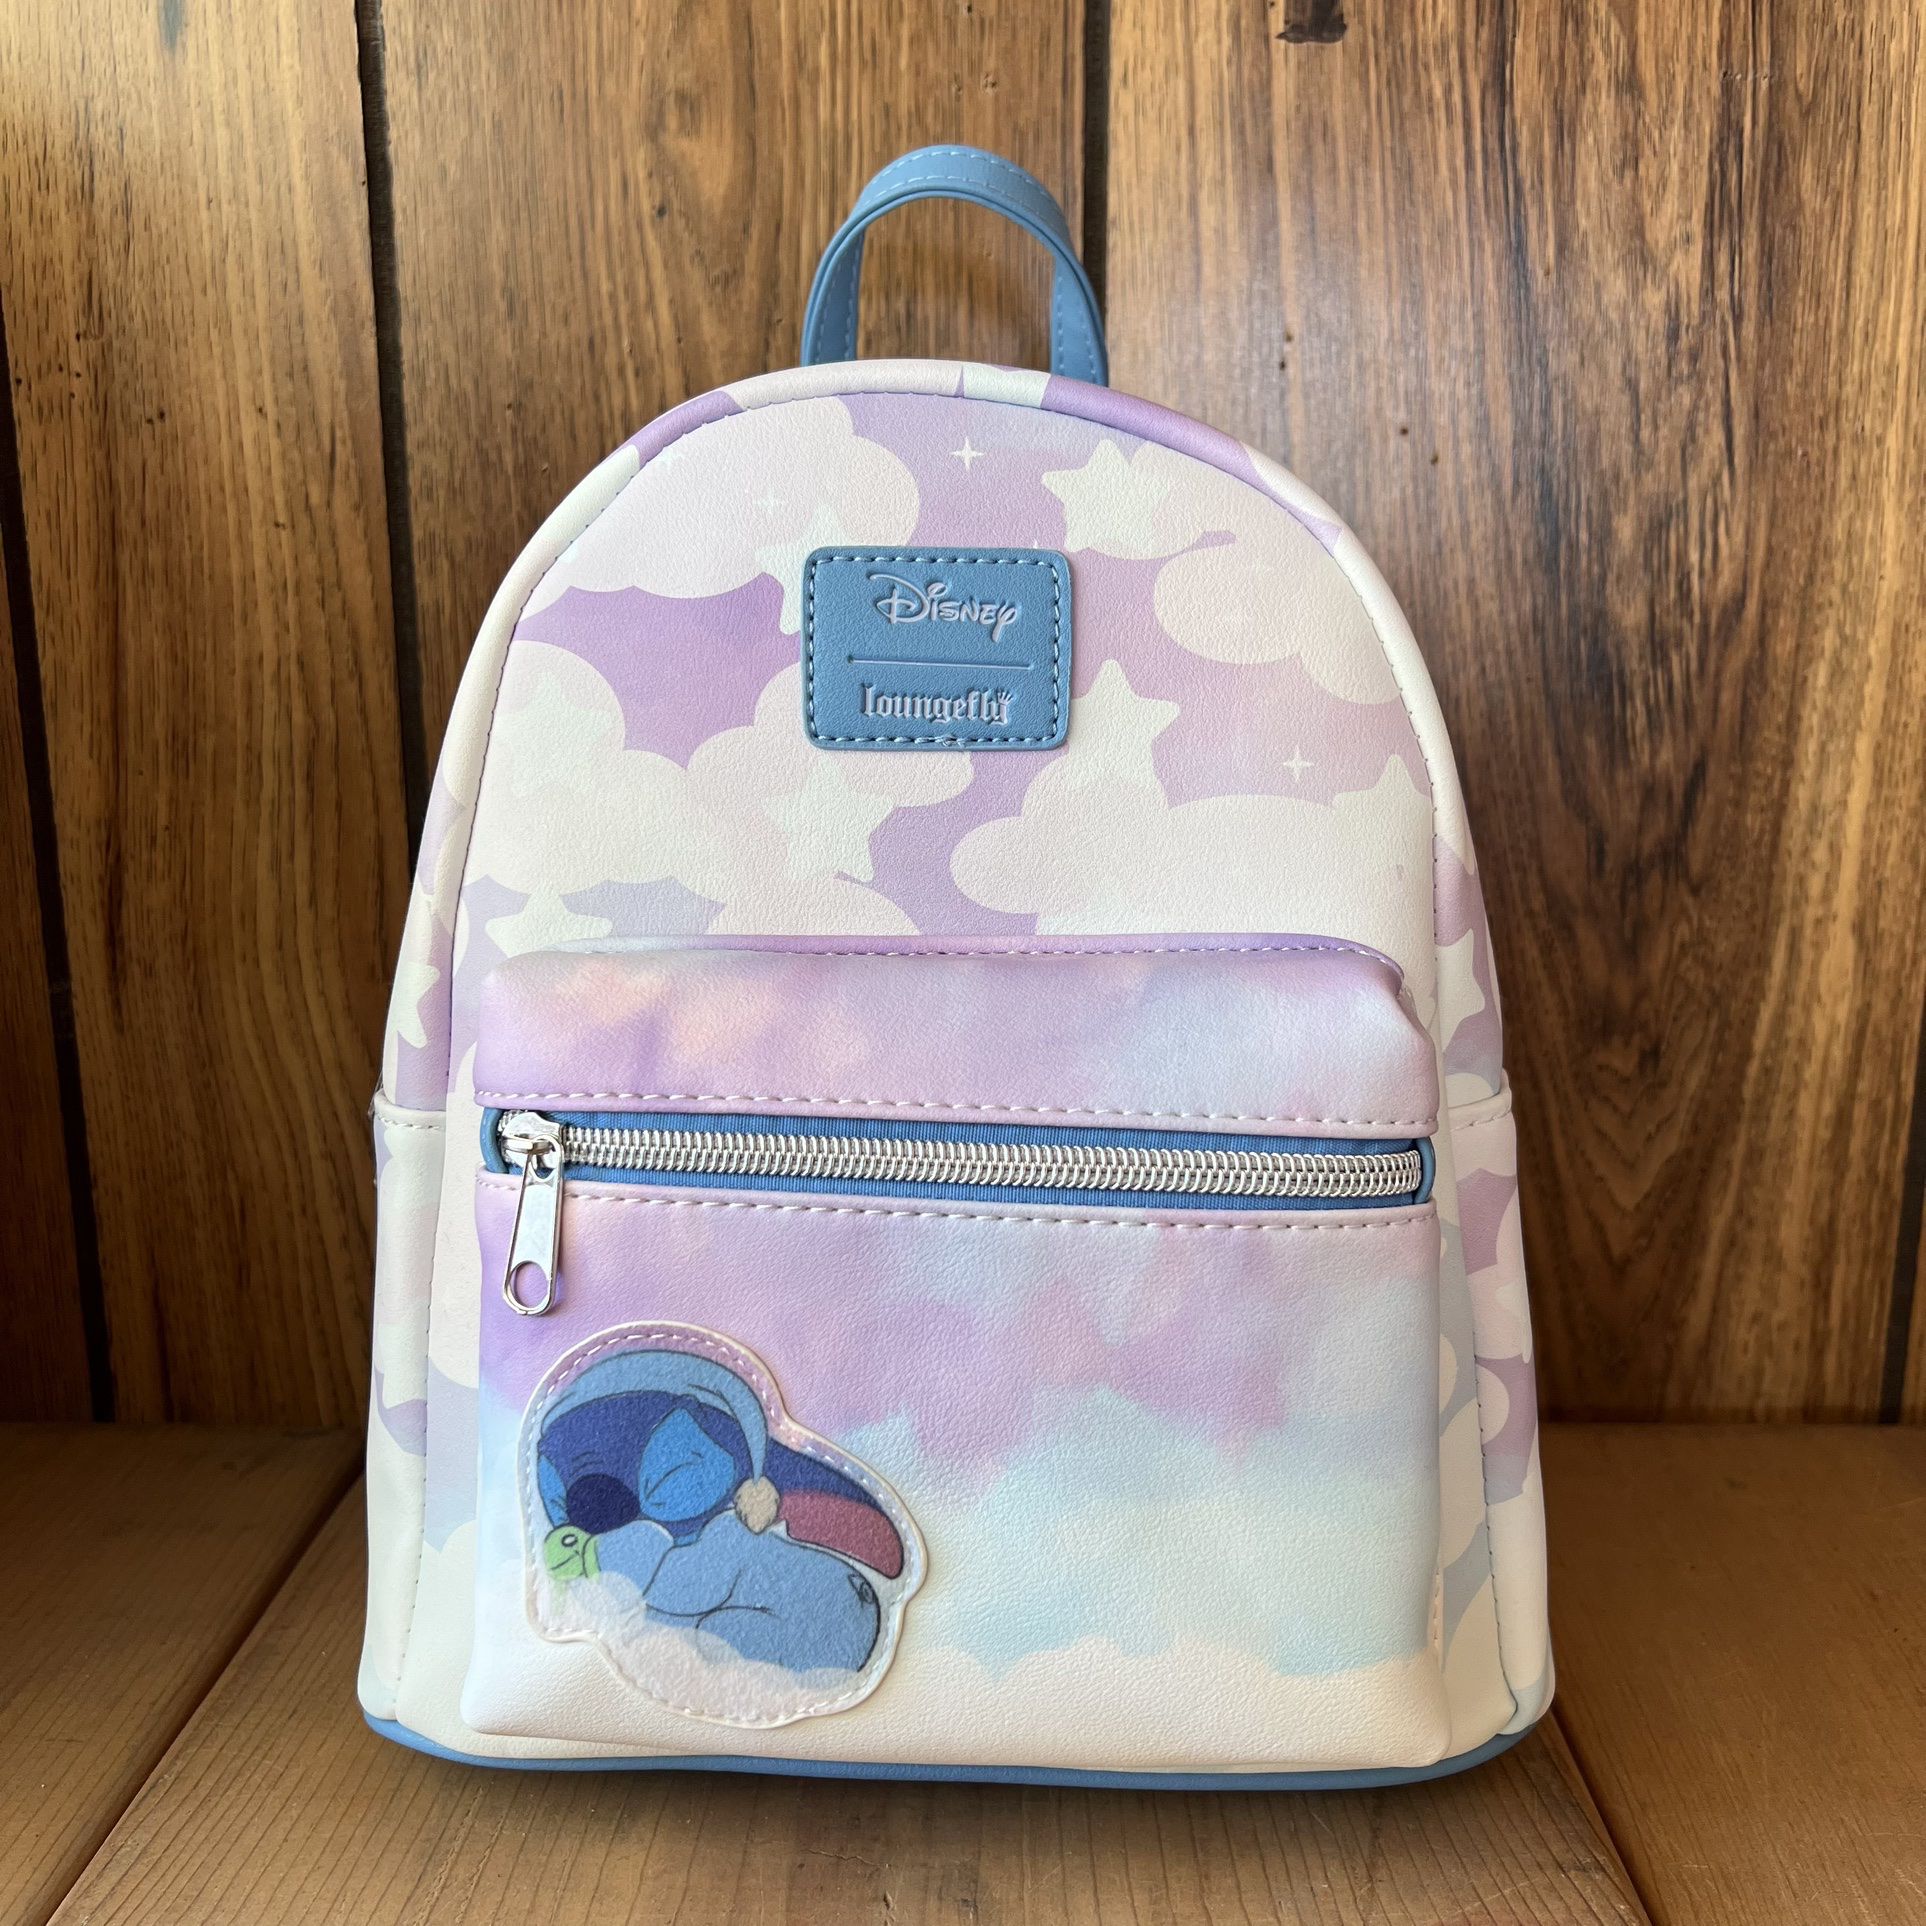 MLB LOUNGEFLY LOS ANGELES DODGERS BASEBALL SEAM STITCH MINI BACKPACK for  Sale in Montebello, CA - OfferUp